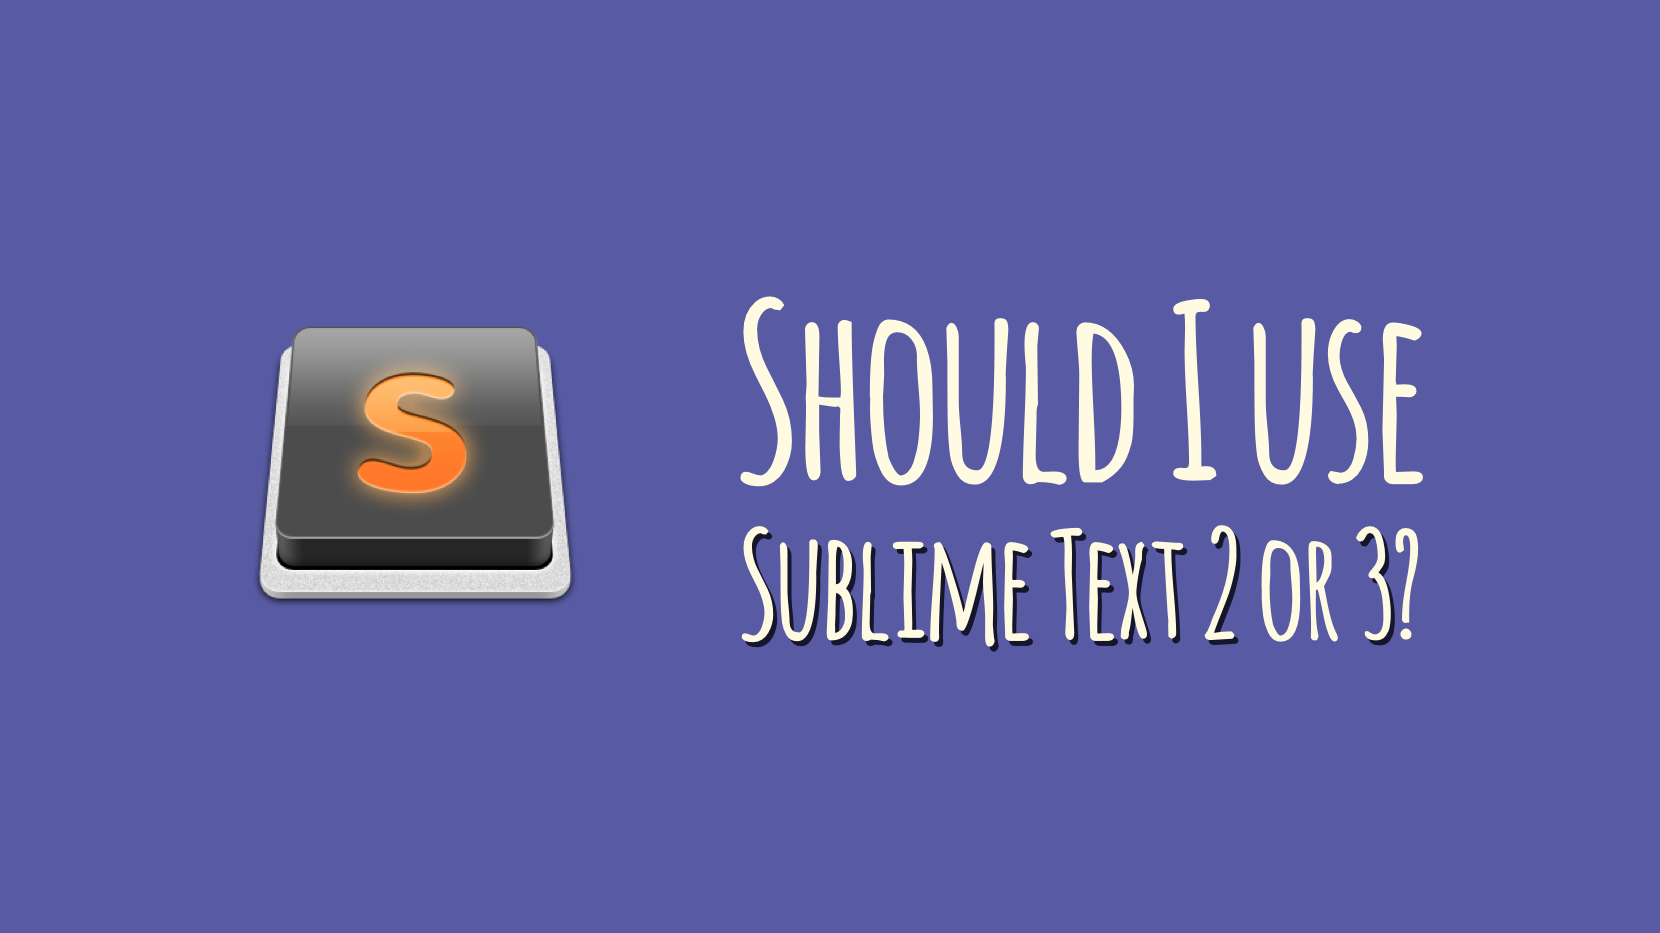 Should I be using Sublime Text 2 or 3?